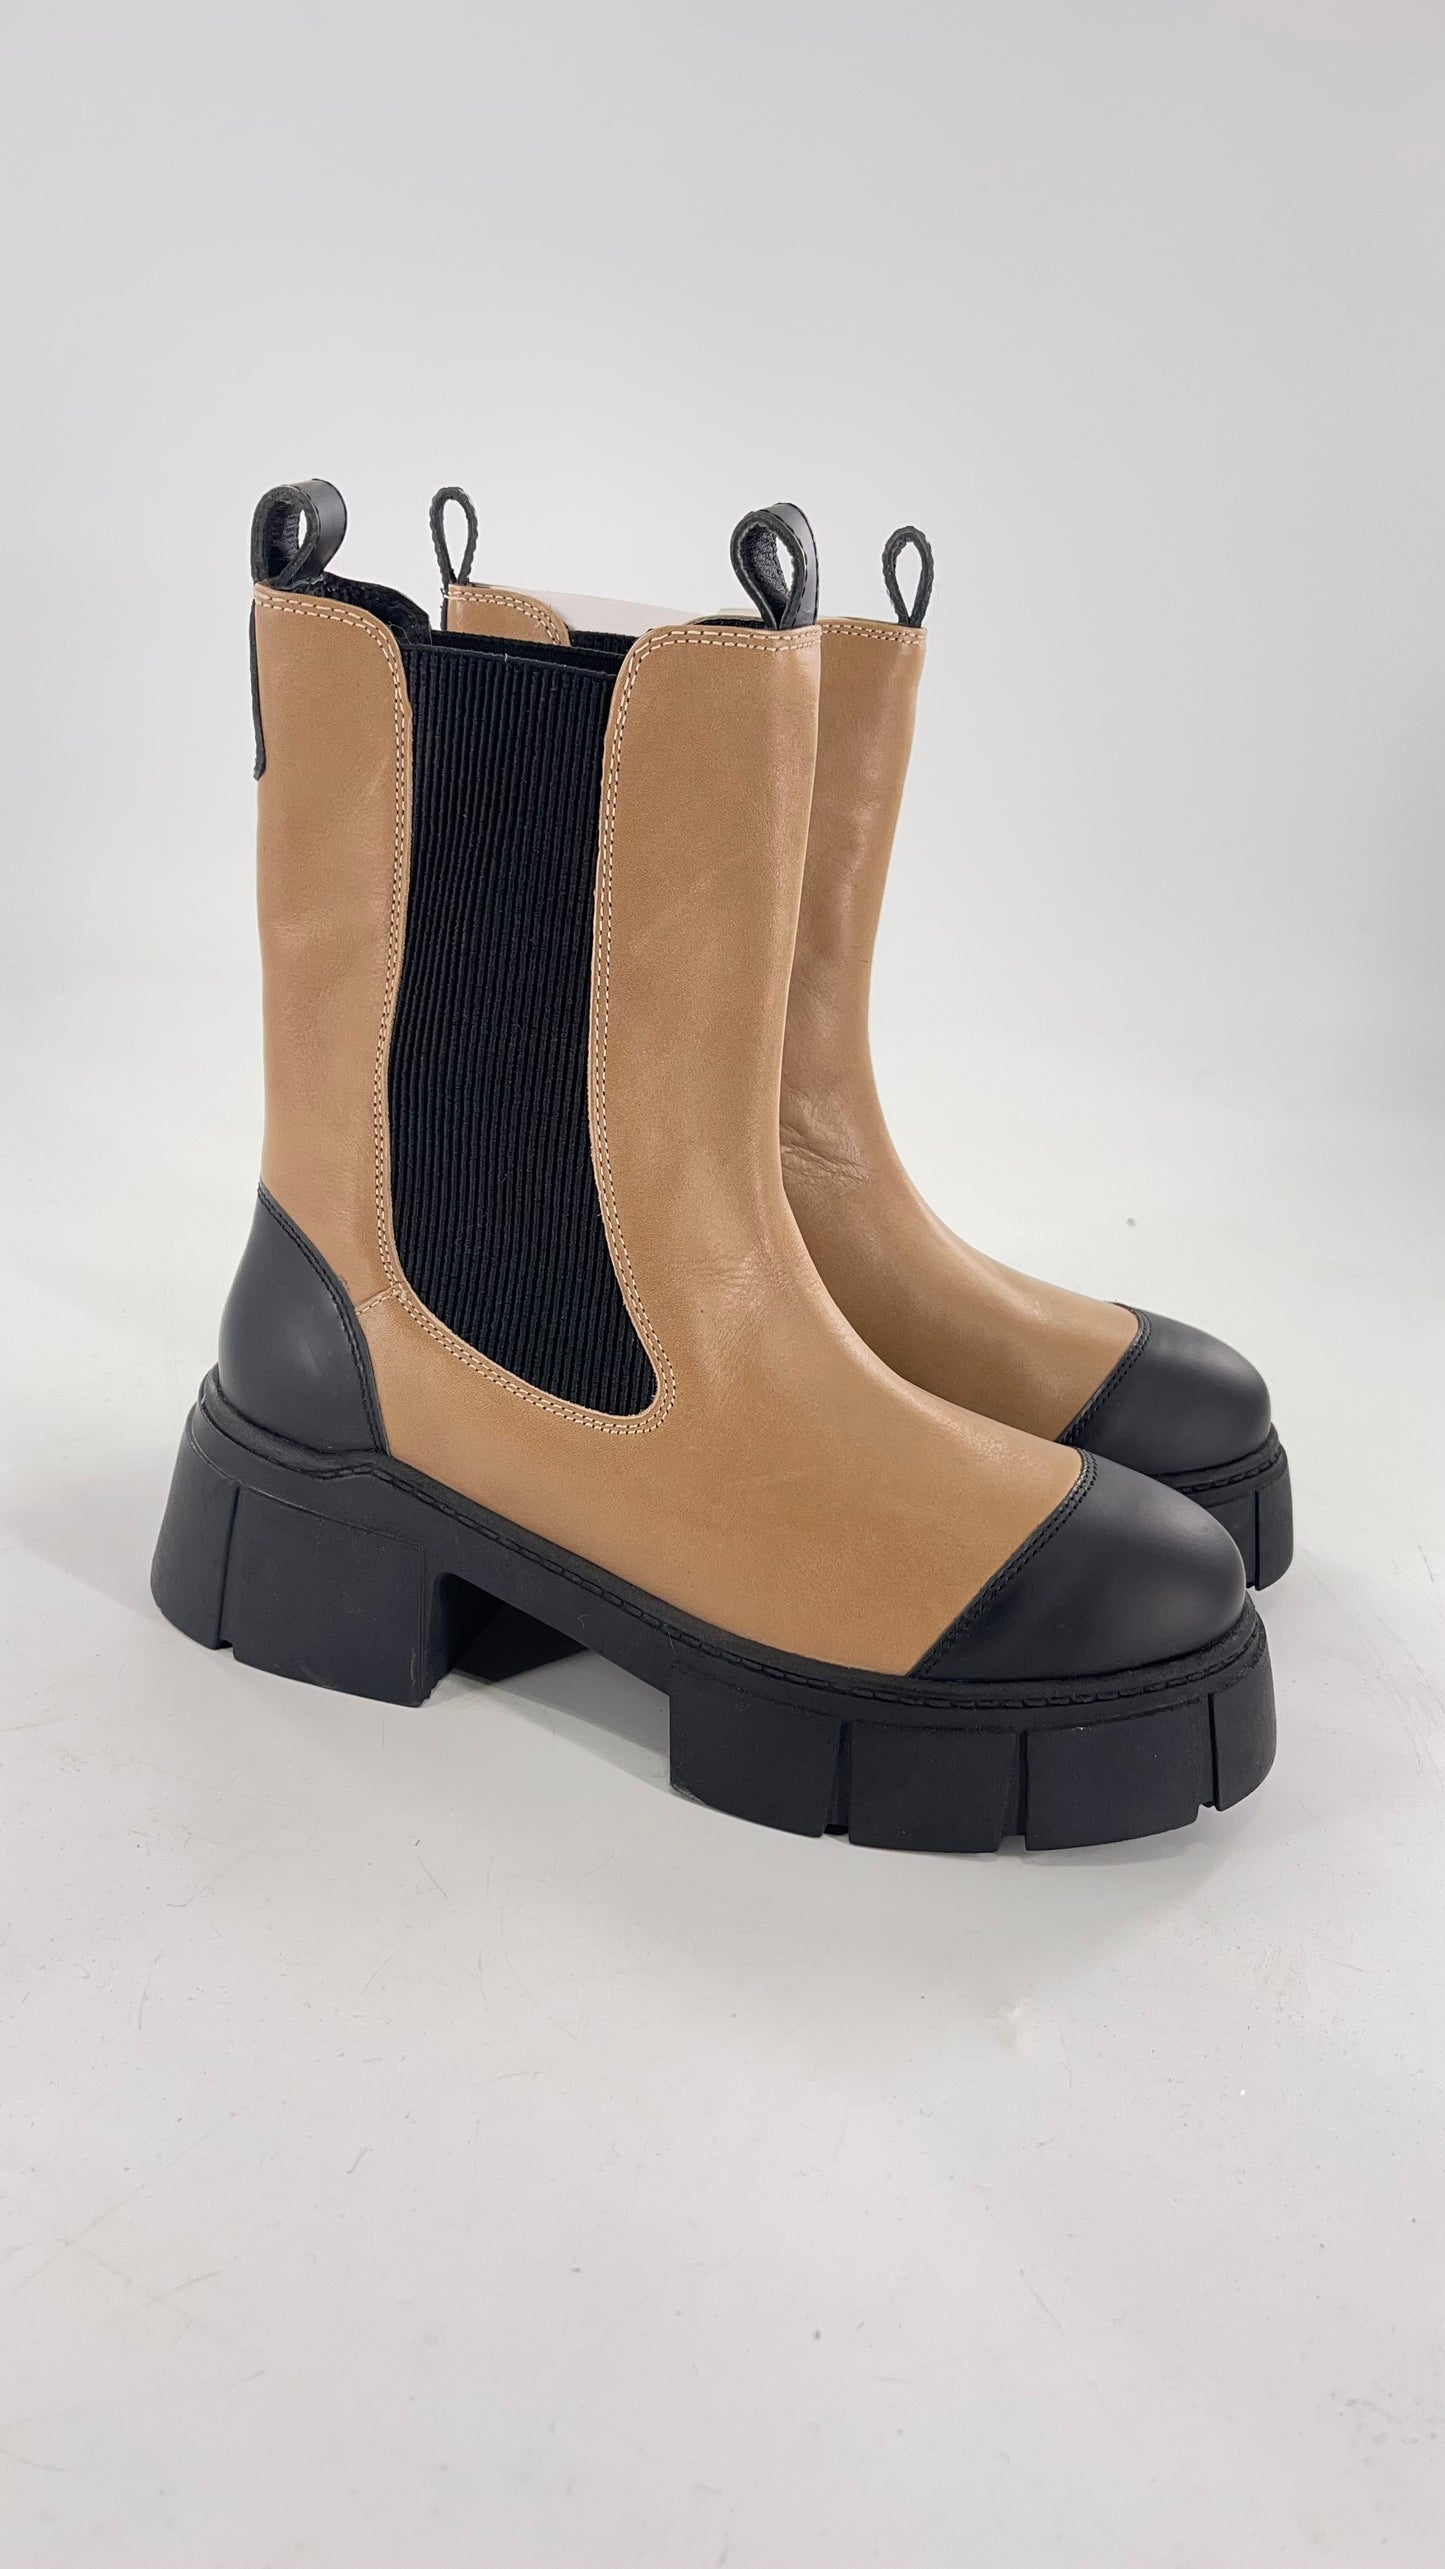 Free People James Chelsea Boot Tan with Chunky Heel and Raised Platform Sole (37.5)